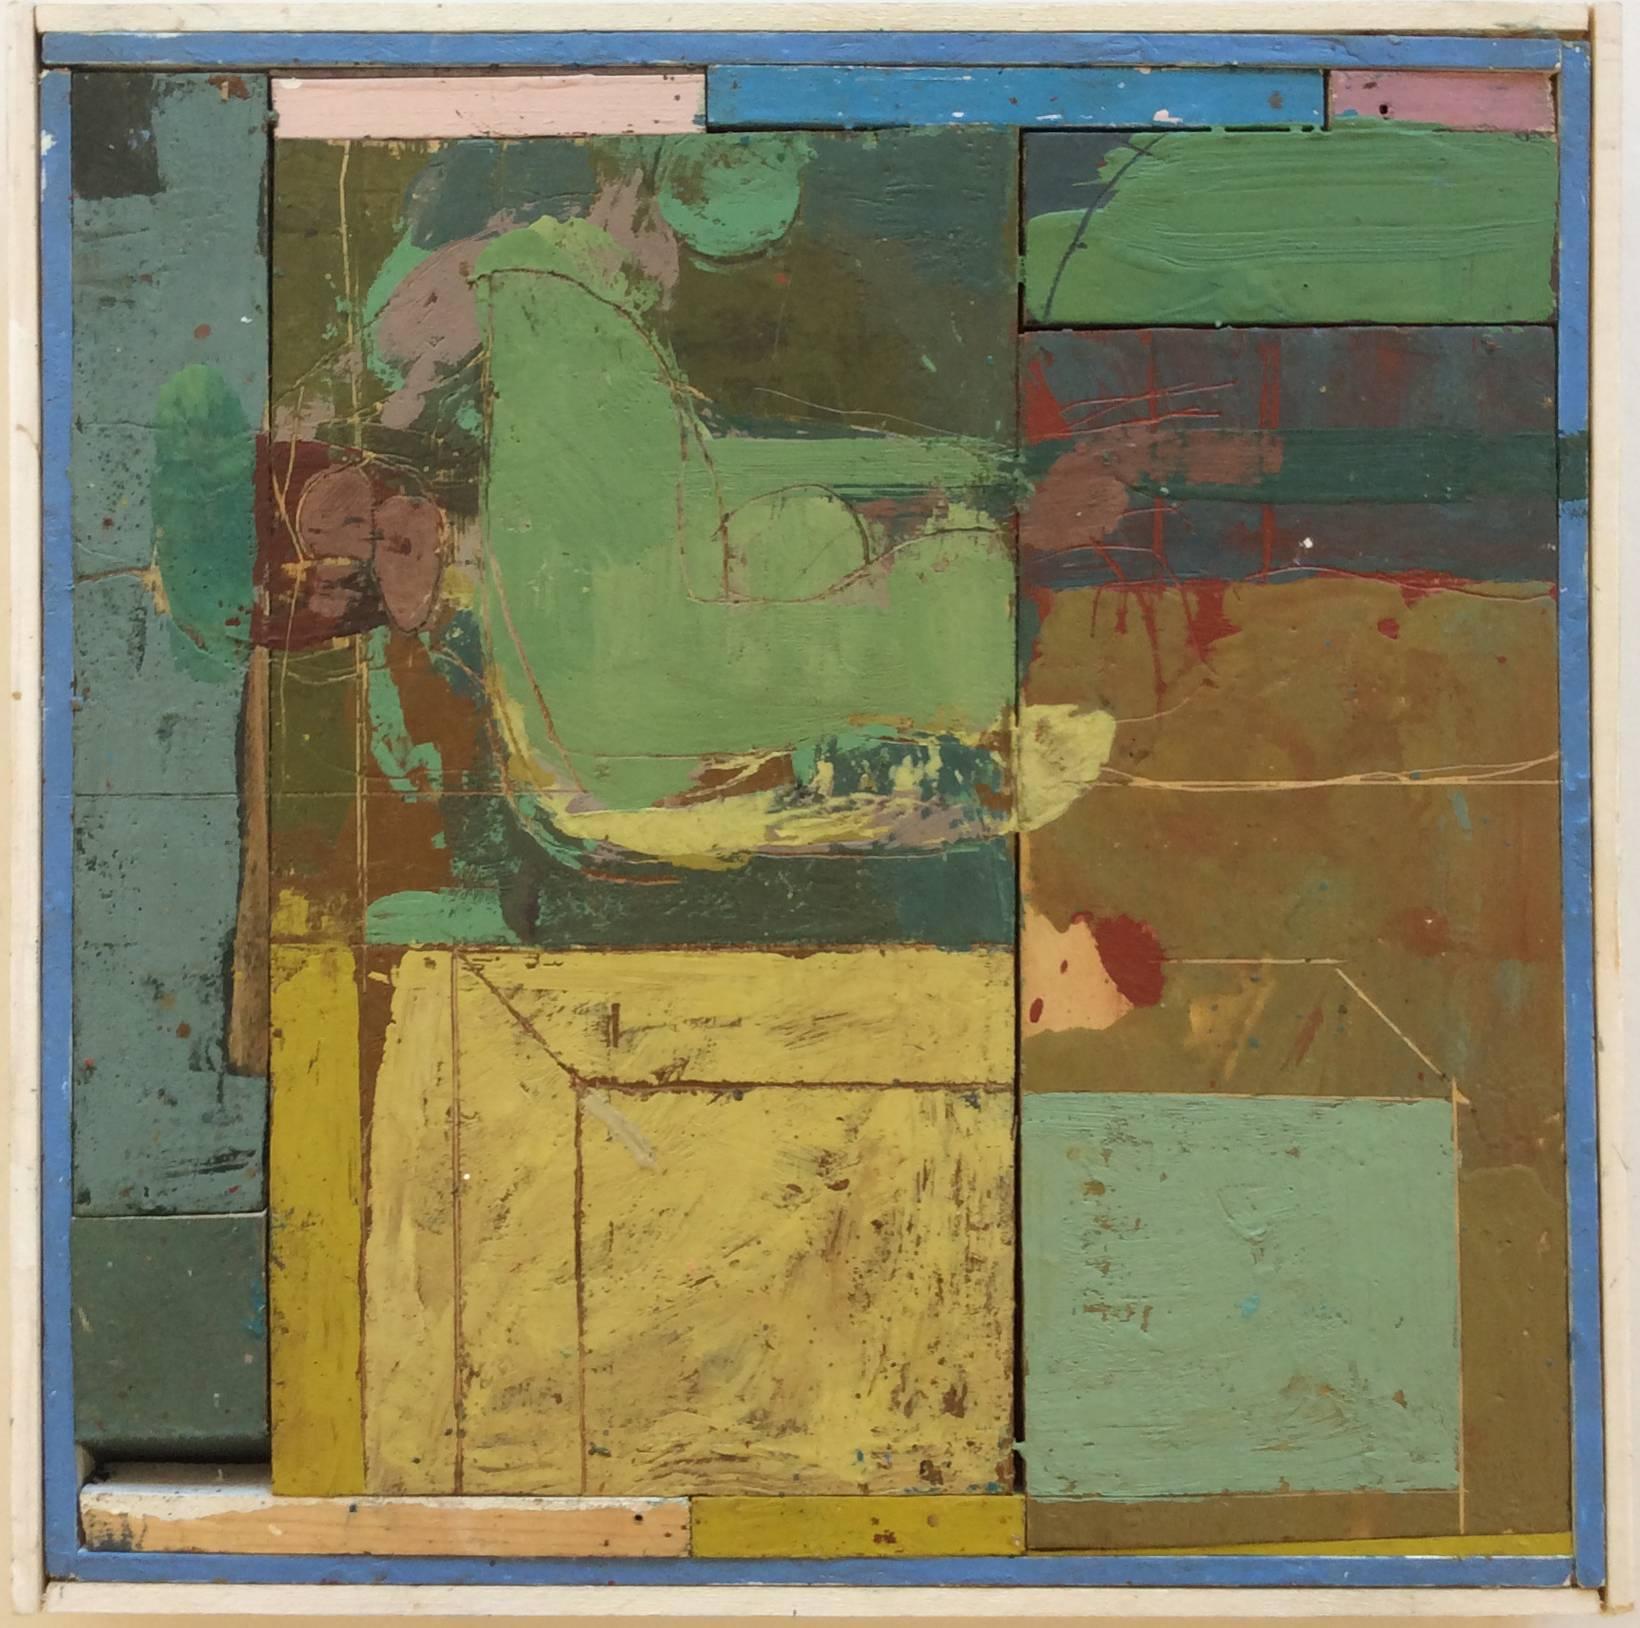 Backyard Pool (Square Abstract Encaustic Painting on Wood Panel in Earth Tones)